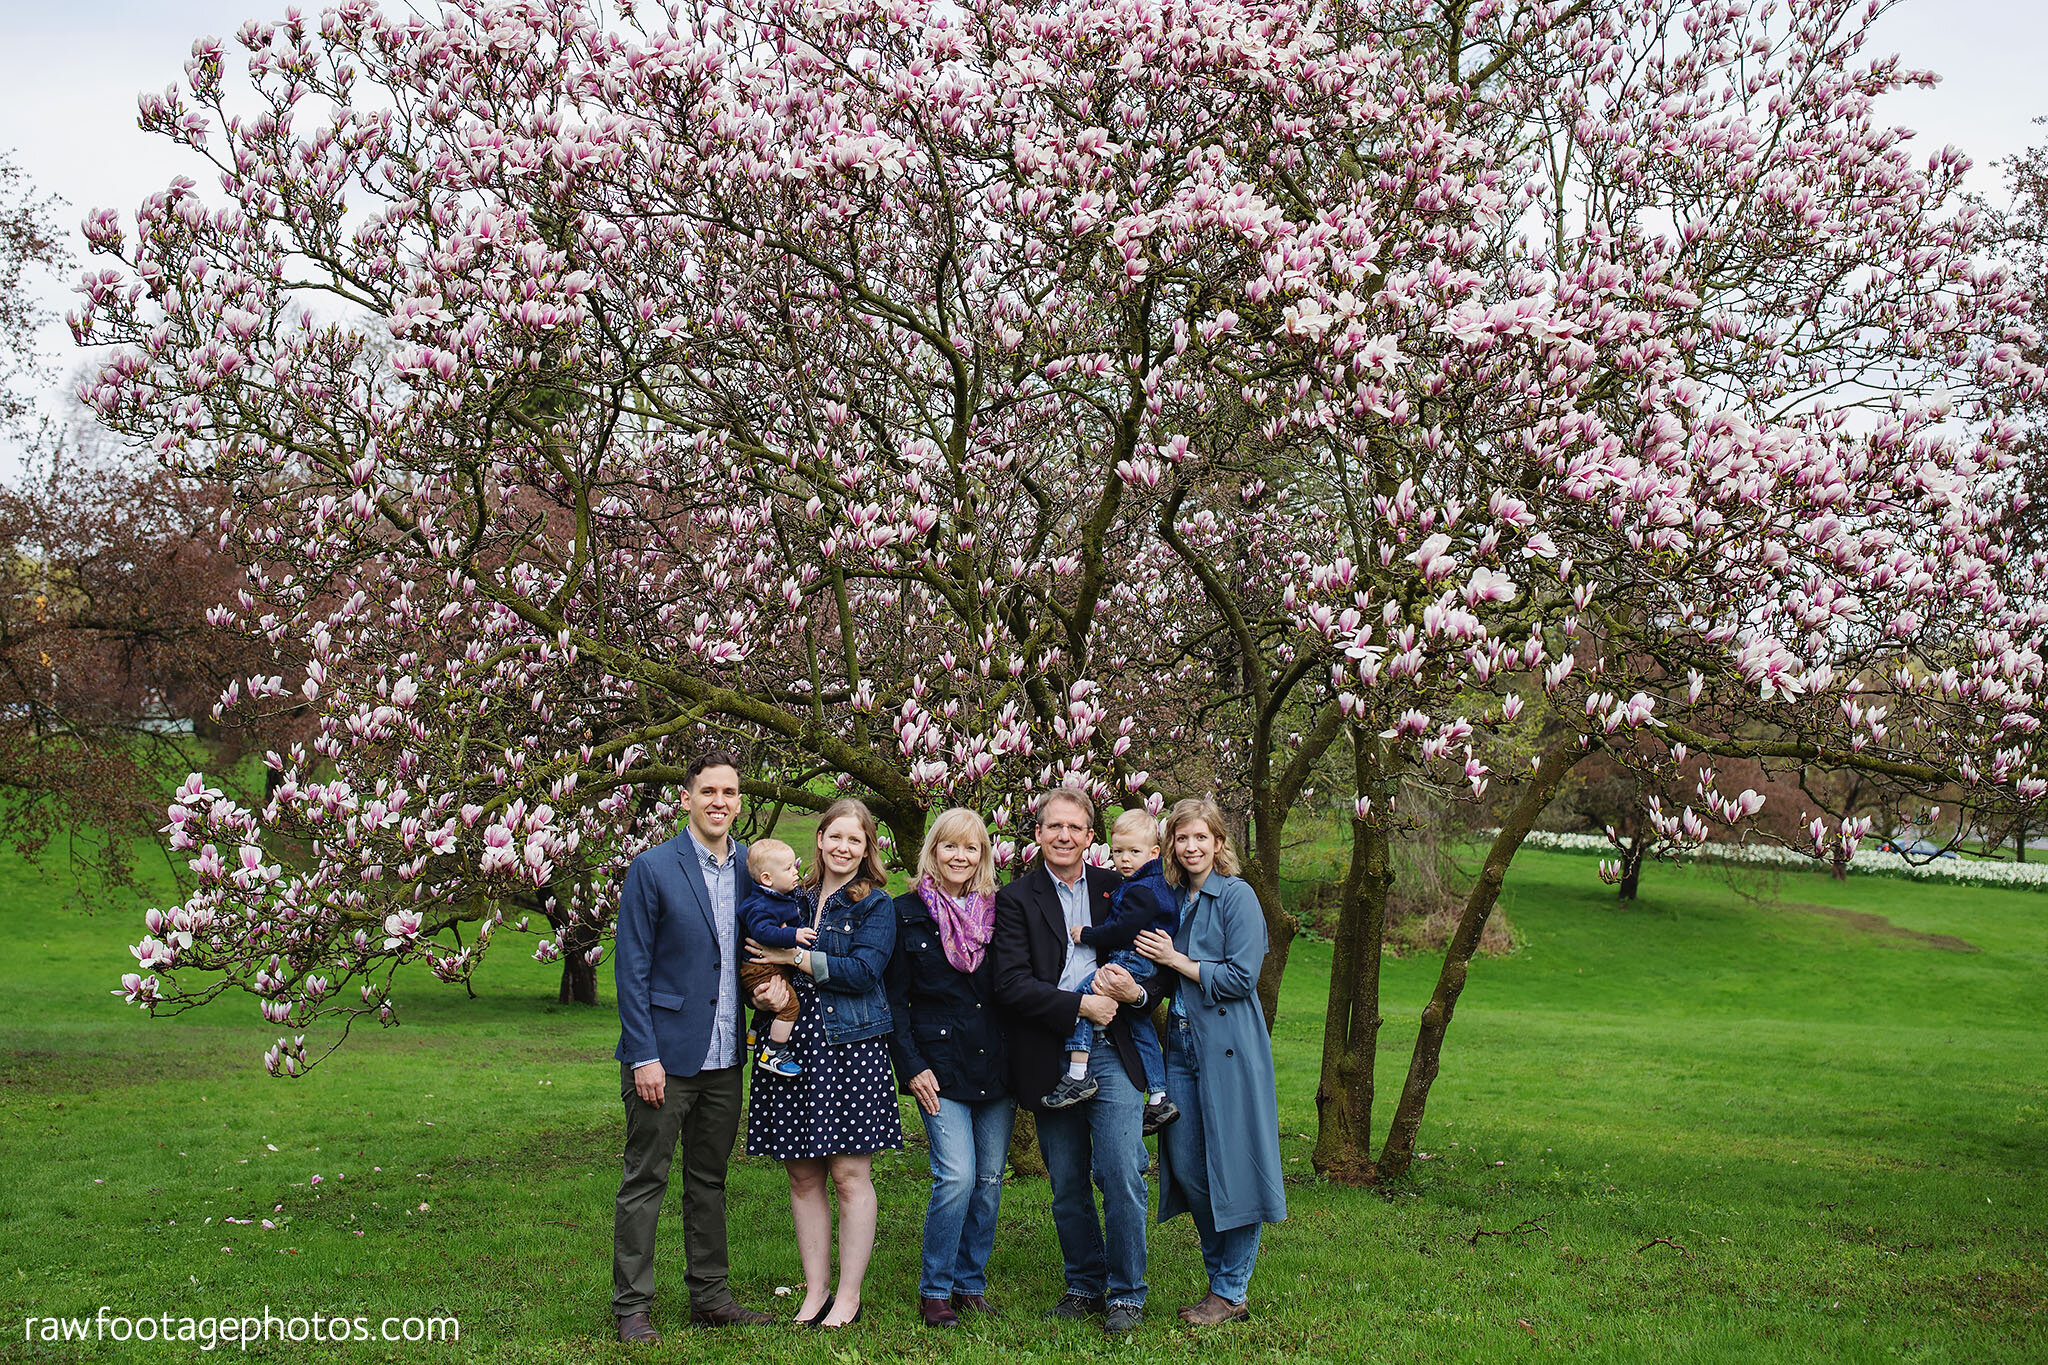 london_ontario_family_photographer-raw_footage_photography-spring_blossoms-extended_family_session-magnolia-blossoms_007.jpg